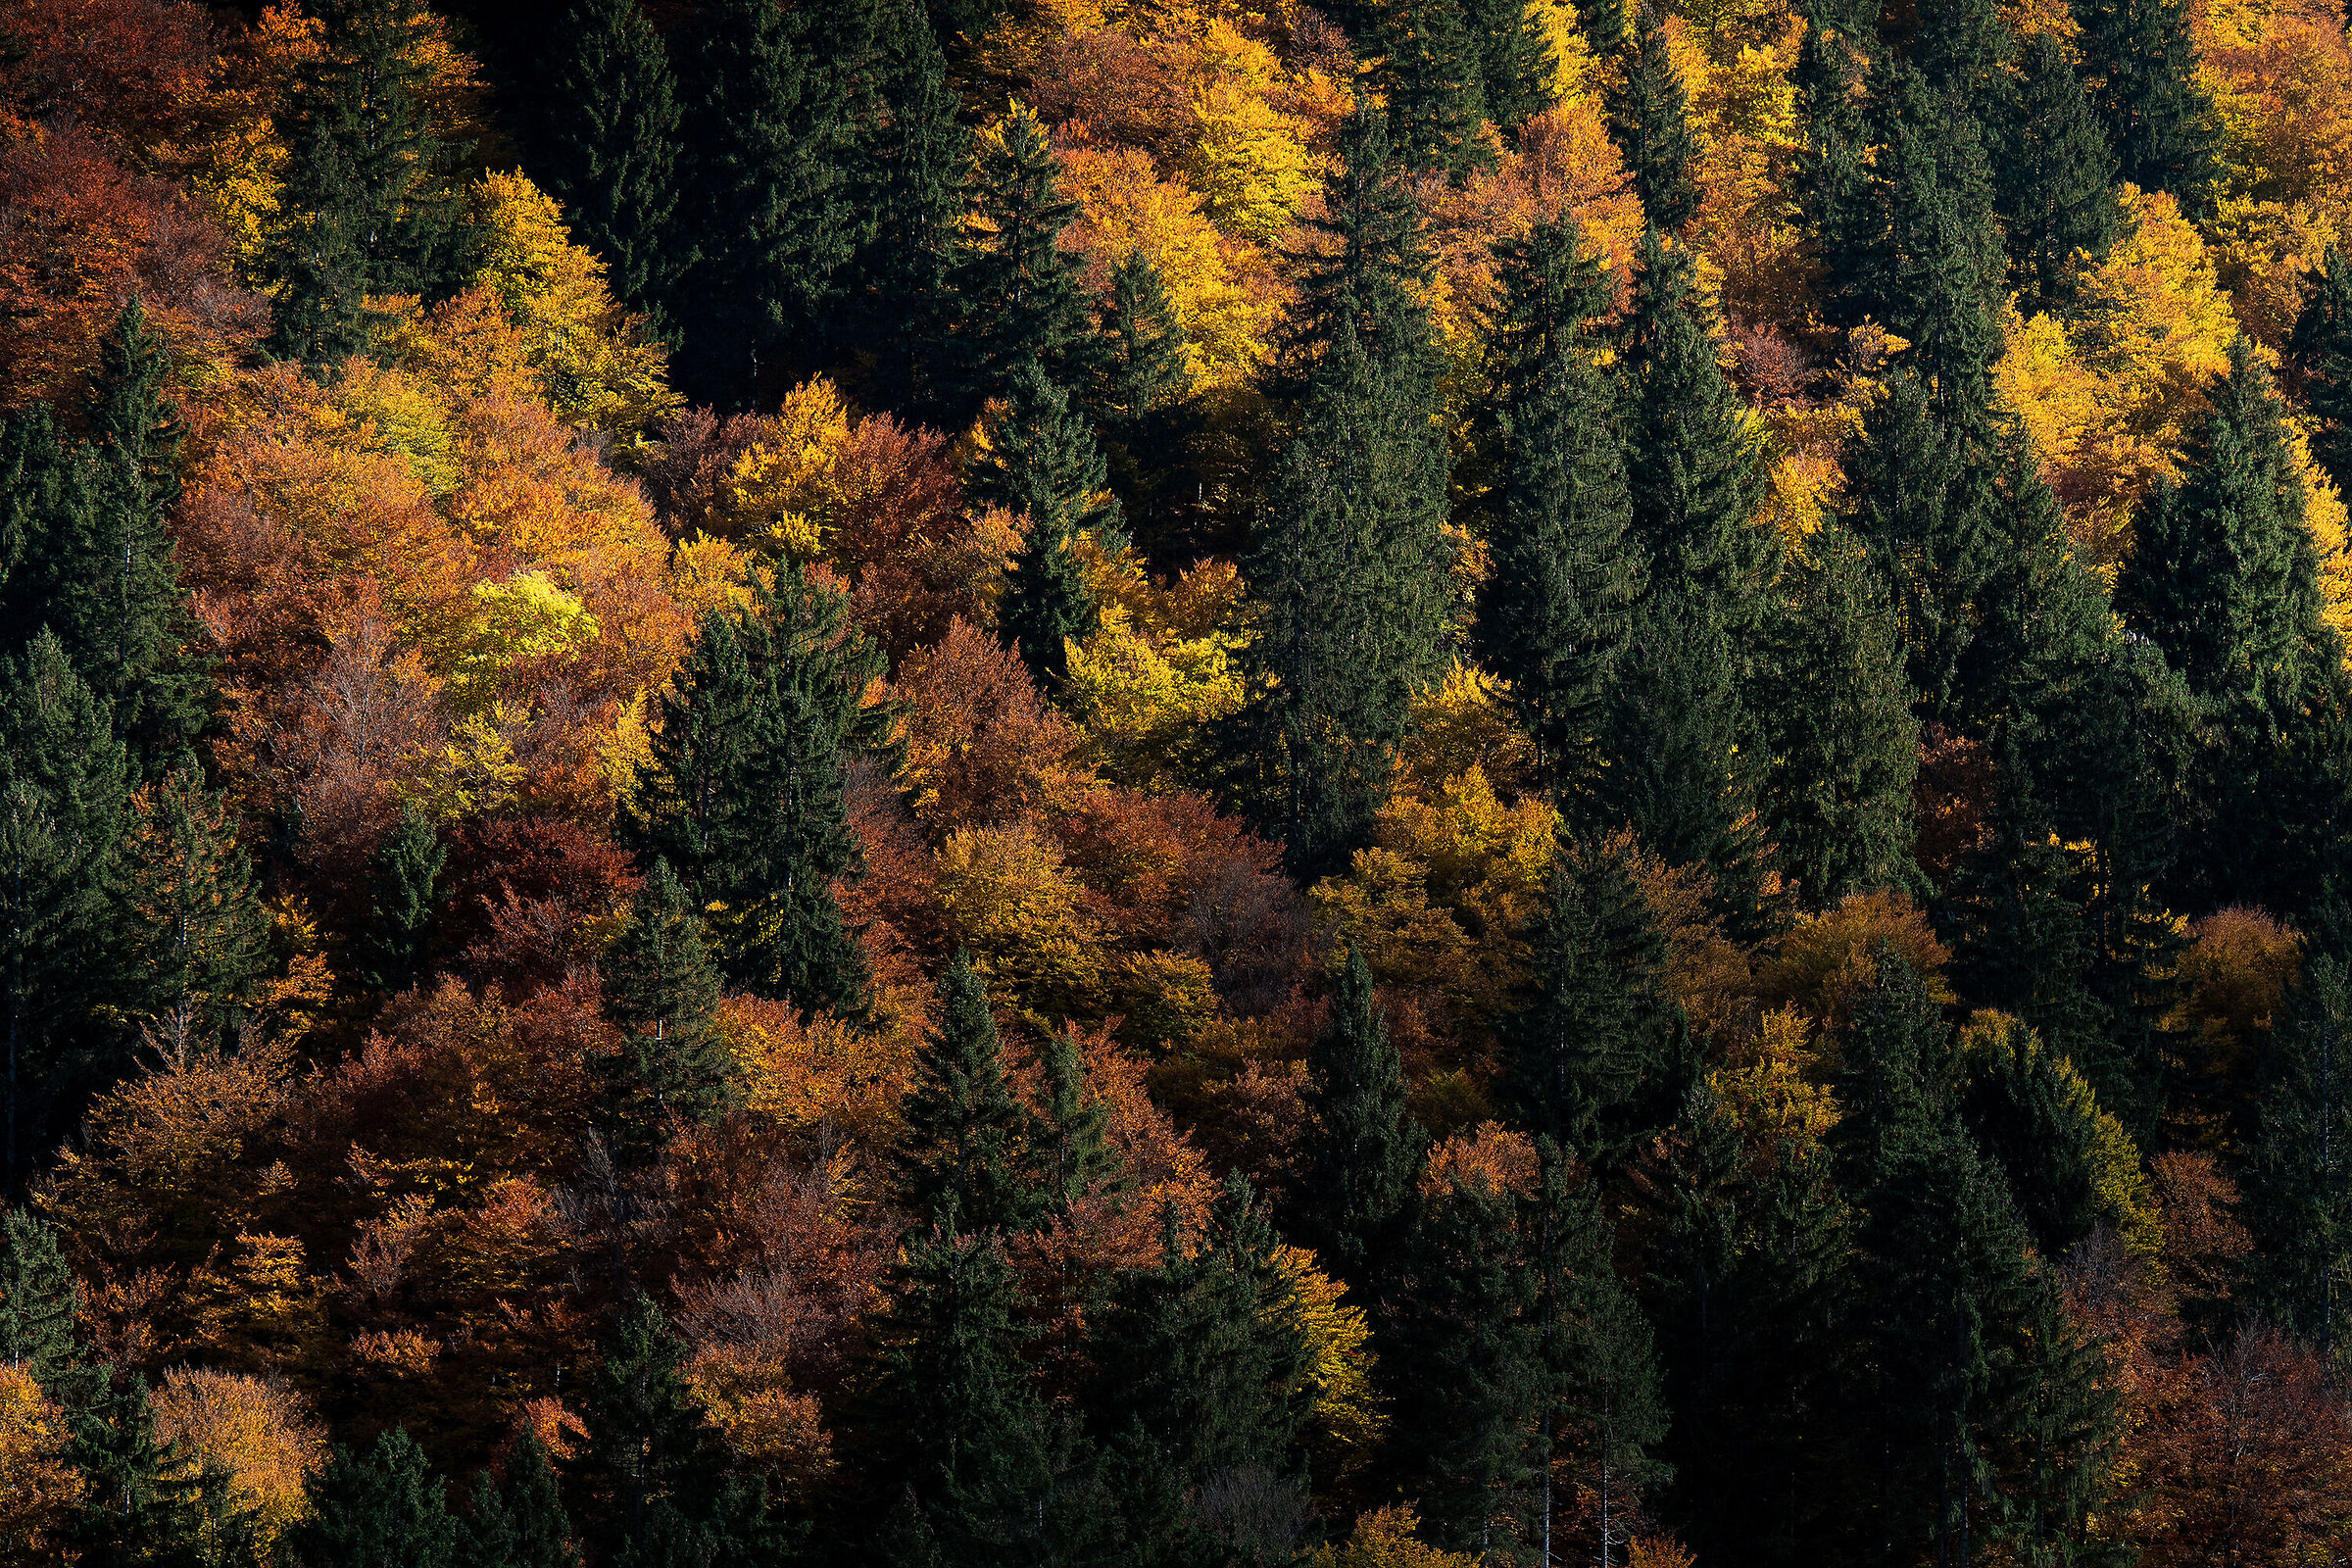 Autumn Contrasts#2 - Tarvisio Forest - Italy...